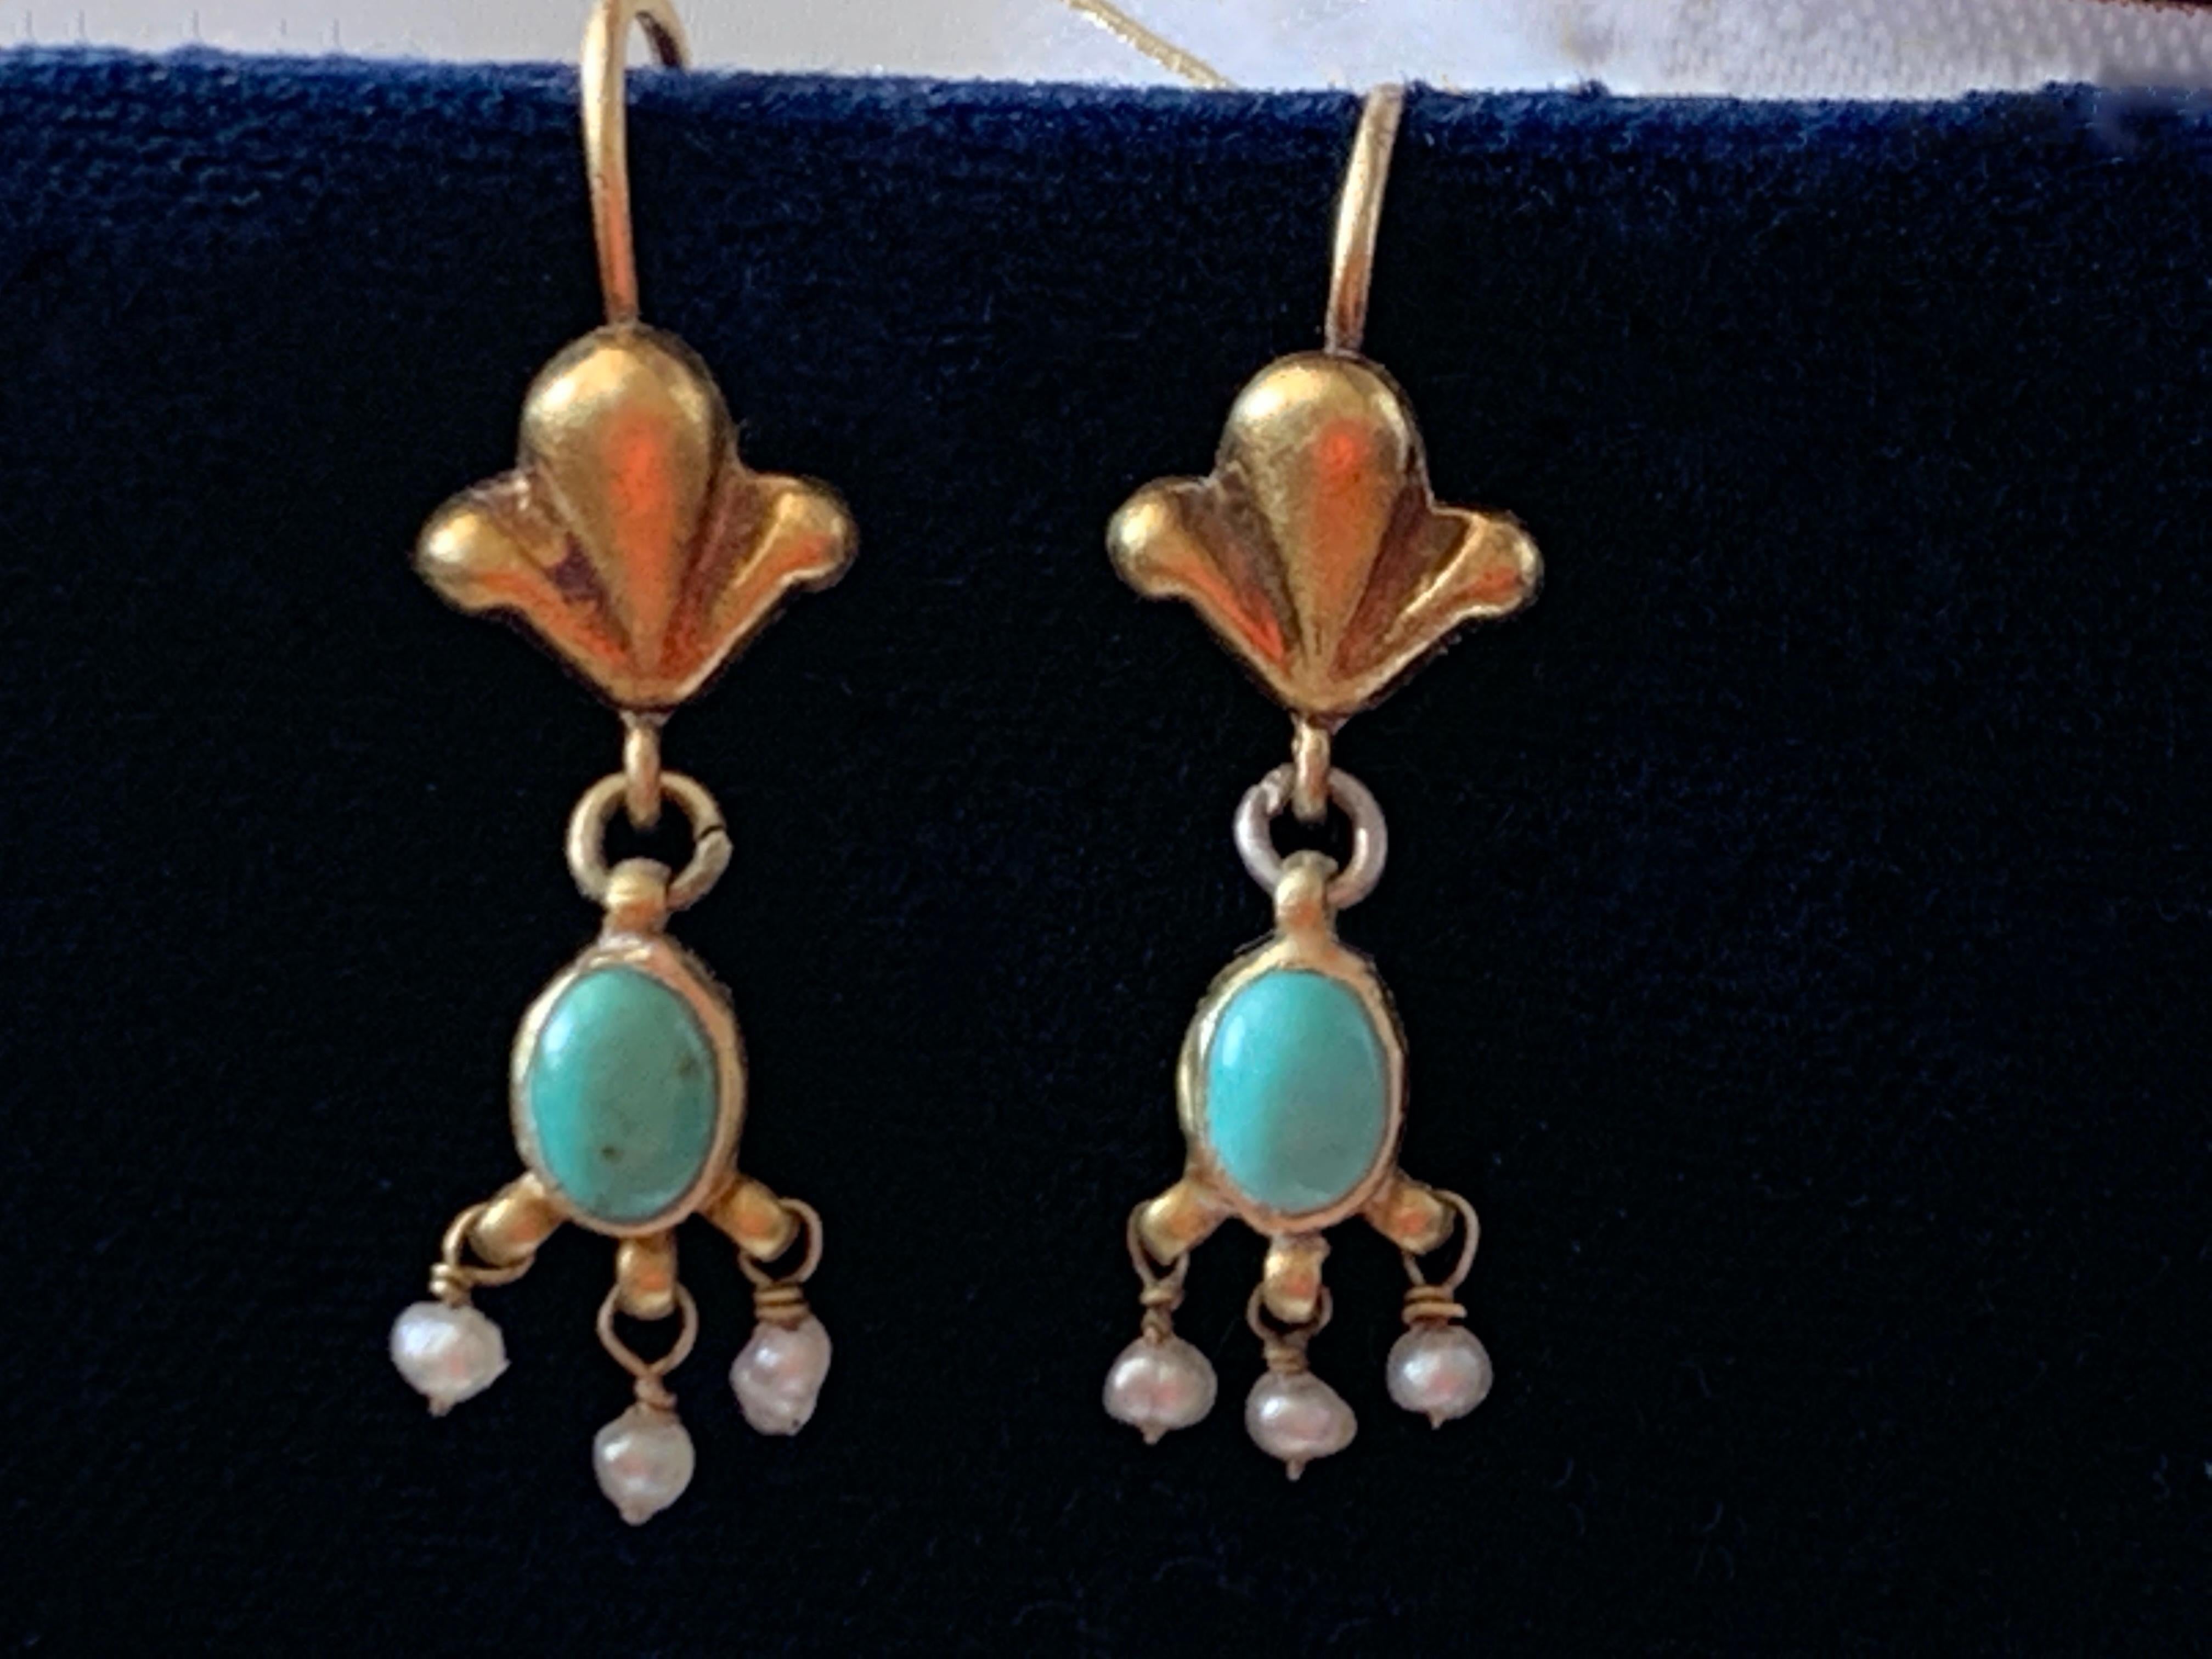 Antique Earrings 
17ct Gold 
Natural Turquoise and pearls
for pierced ears 
Hand crafted